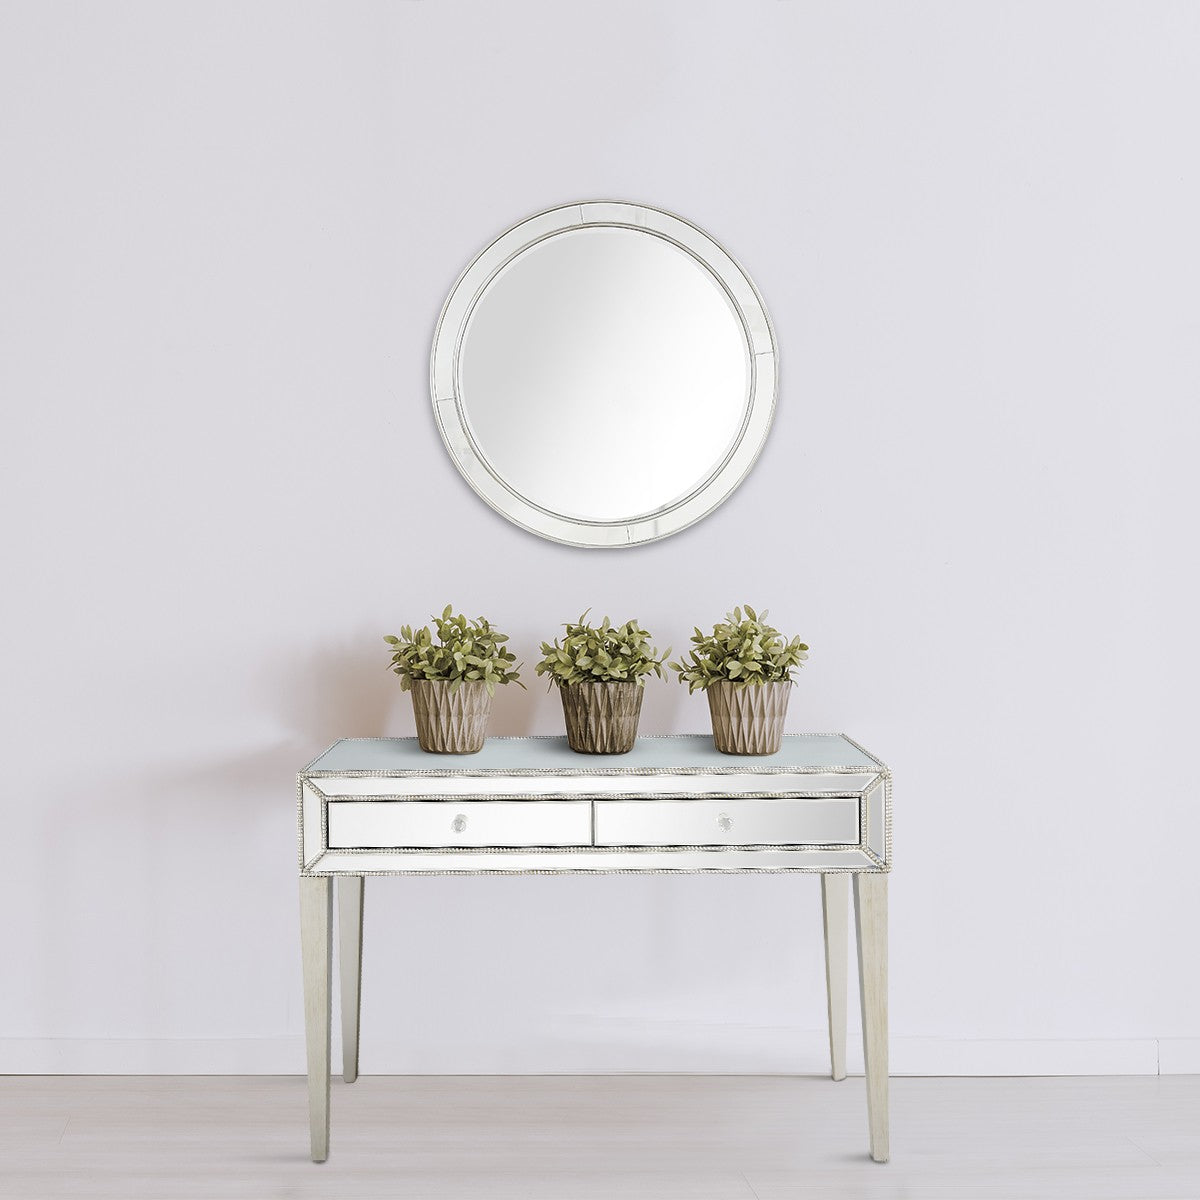 Silver Beaded Mirror and Console Table By Homeroots